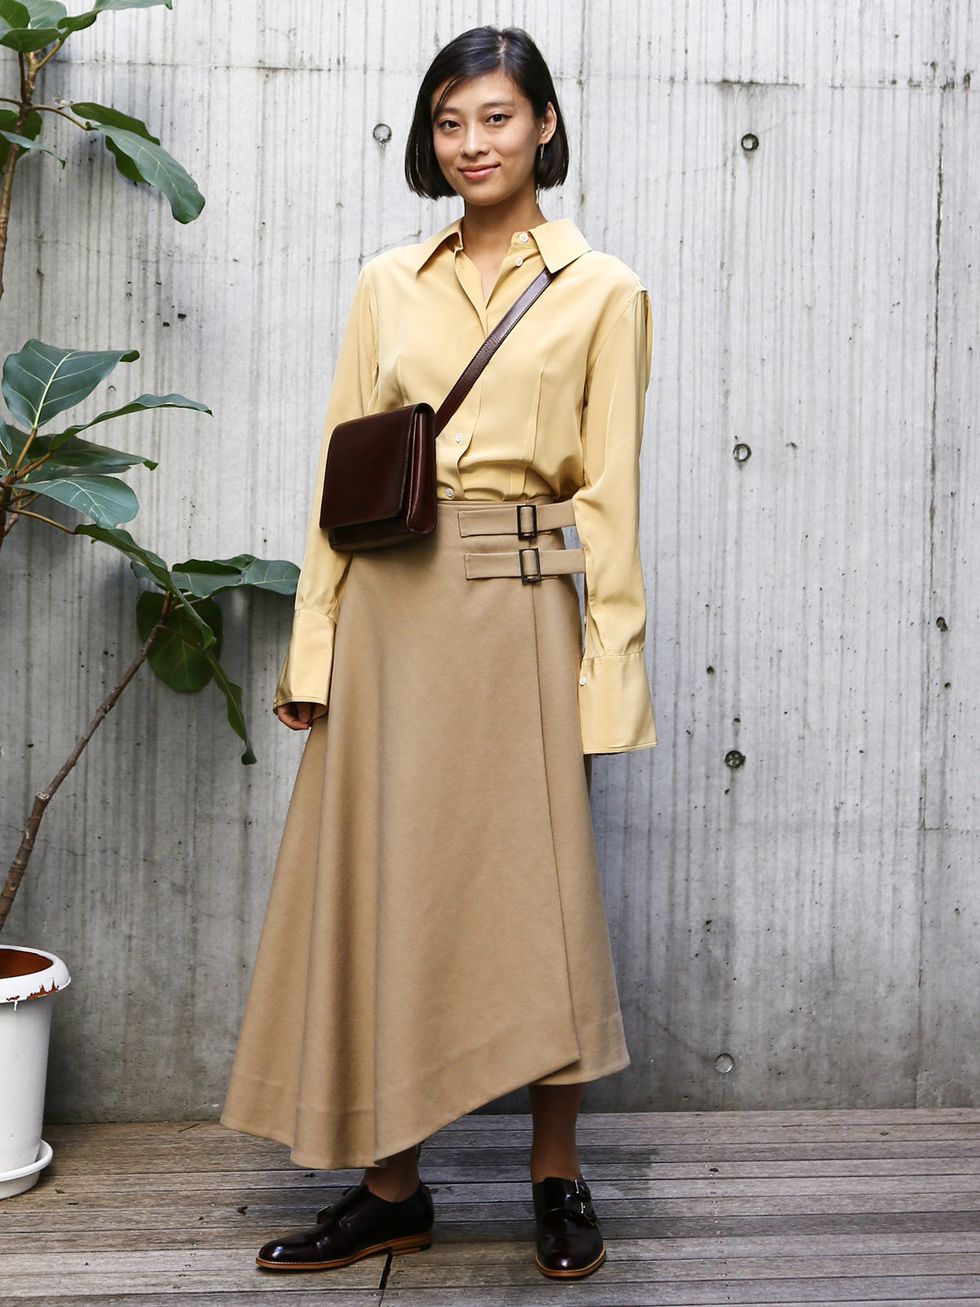 Clothing, Street fashion, Outerwear, Fashion, Beige, Brown, Coat, Trench coat, Dress, Waist, 